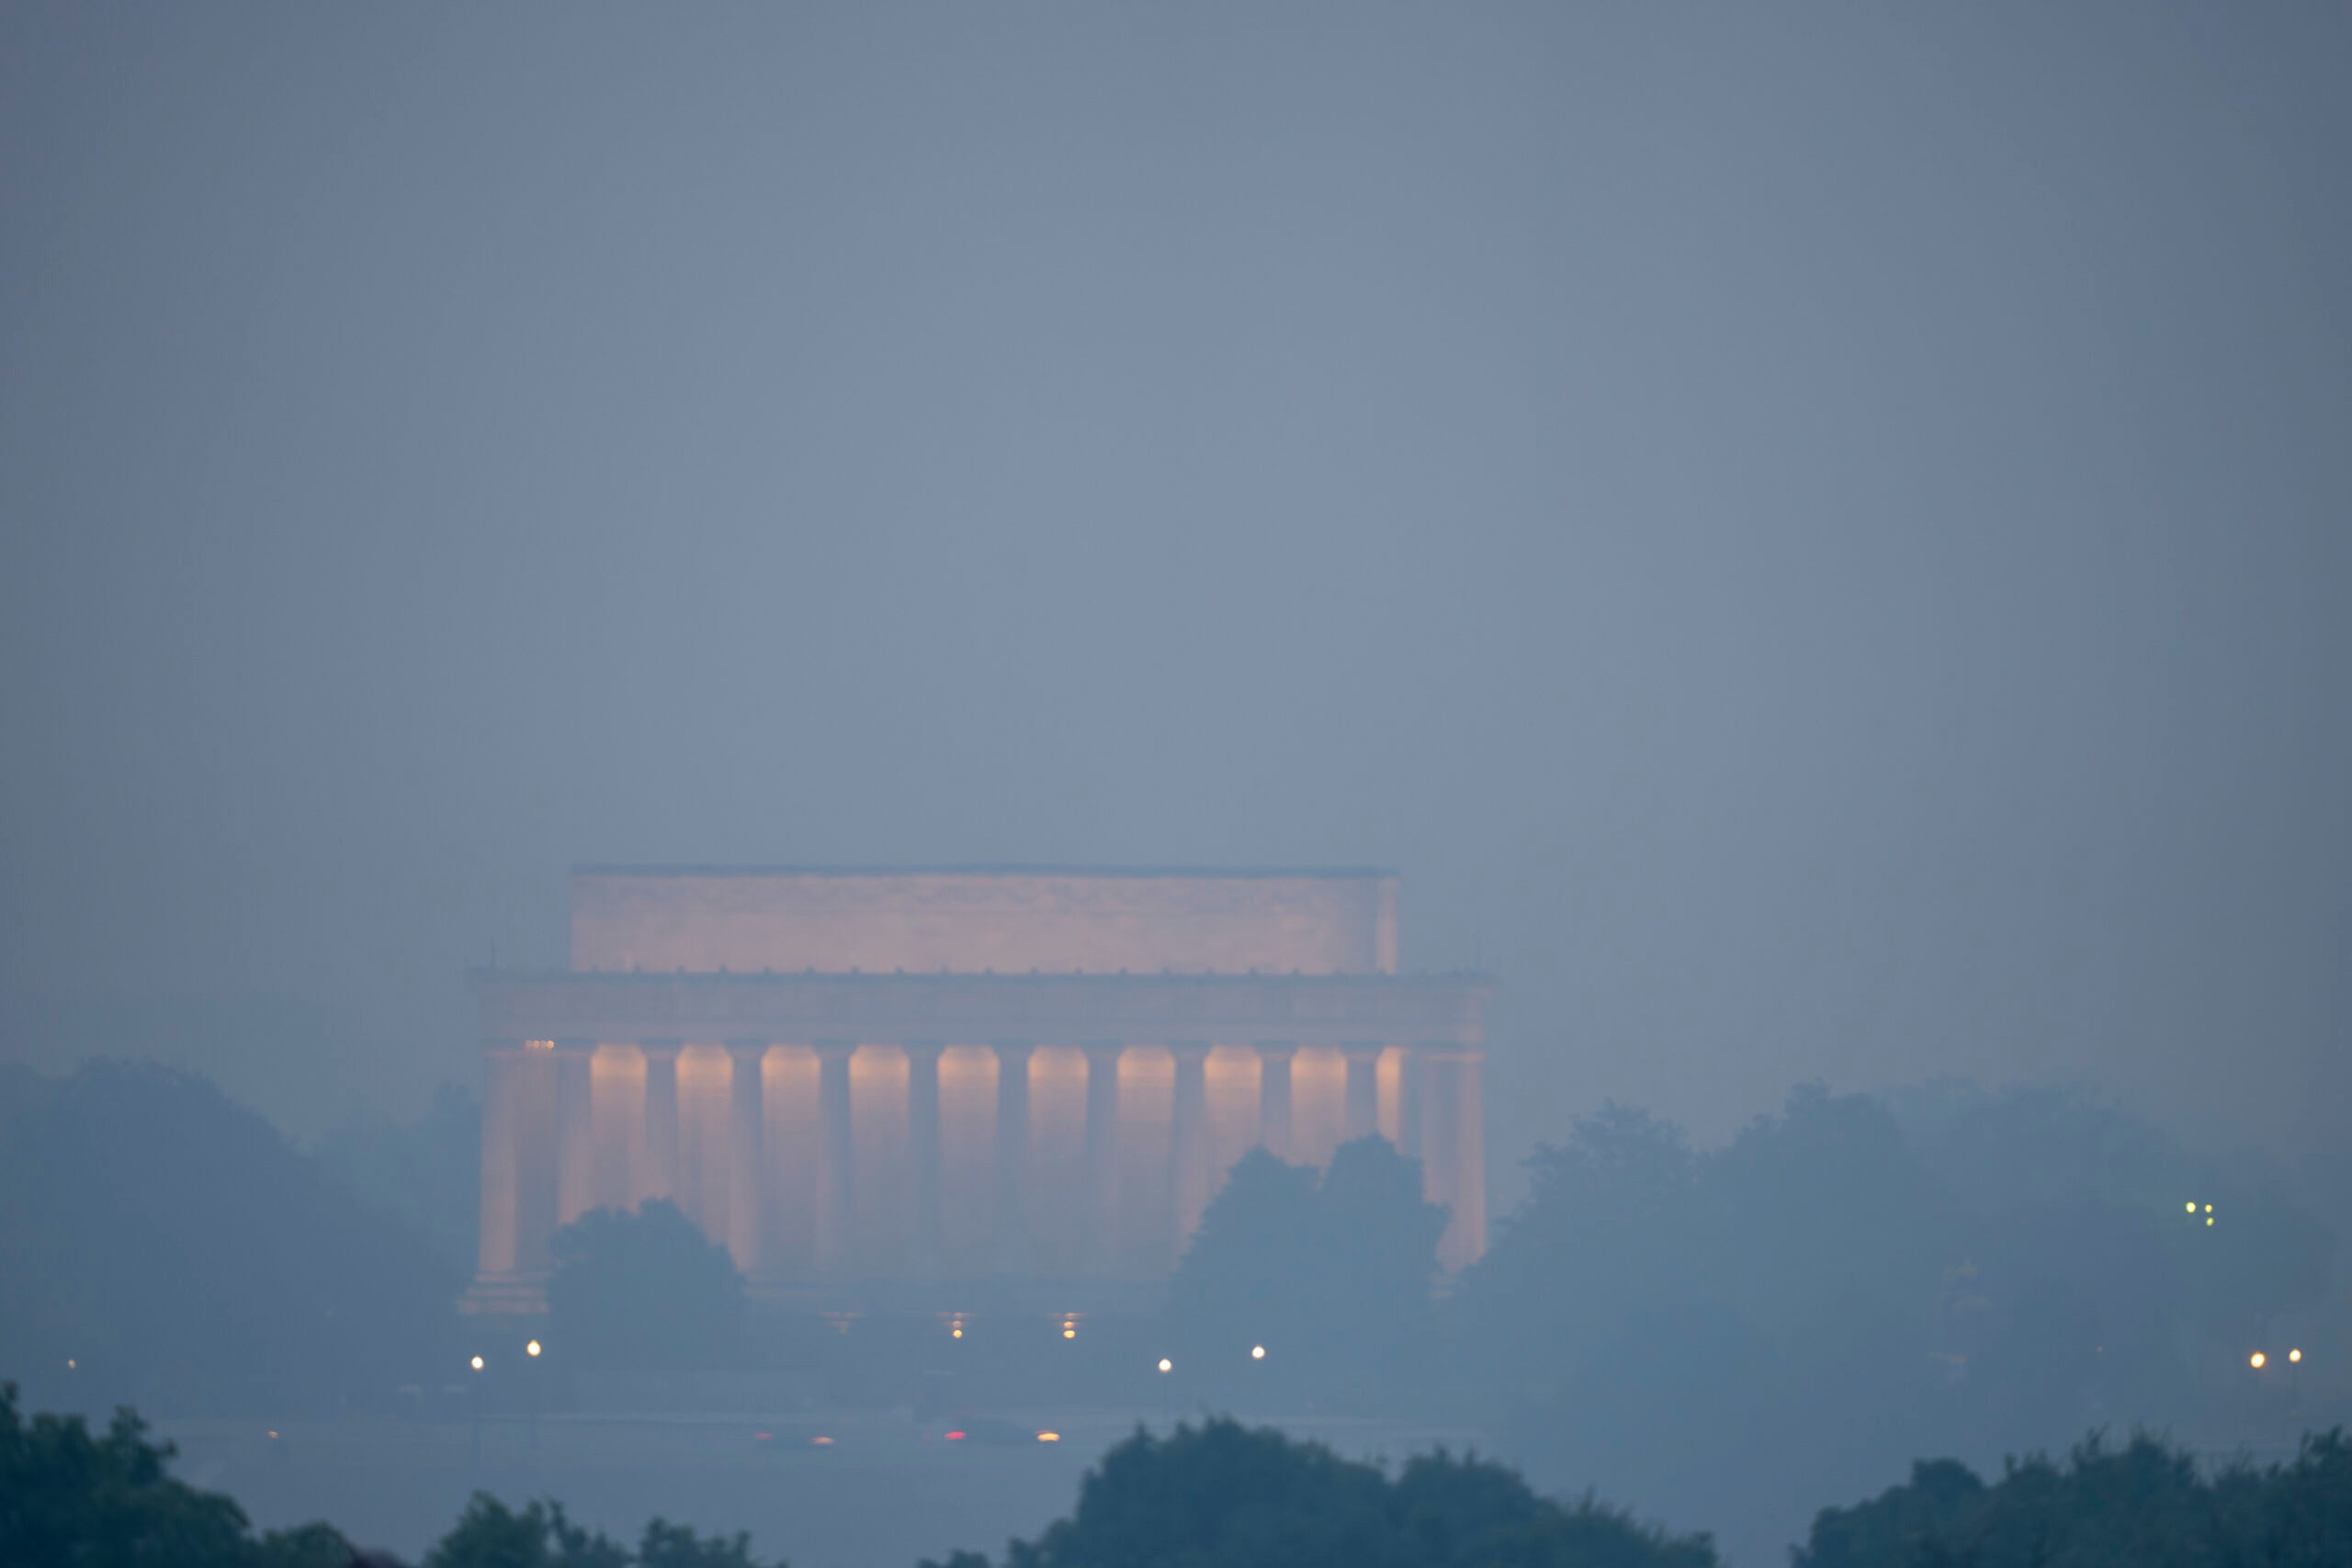 Haze blankets the Lincoln Memorial on the National Mall in Washington.